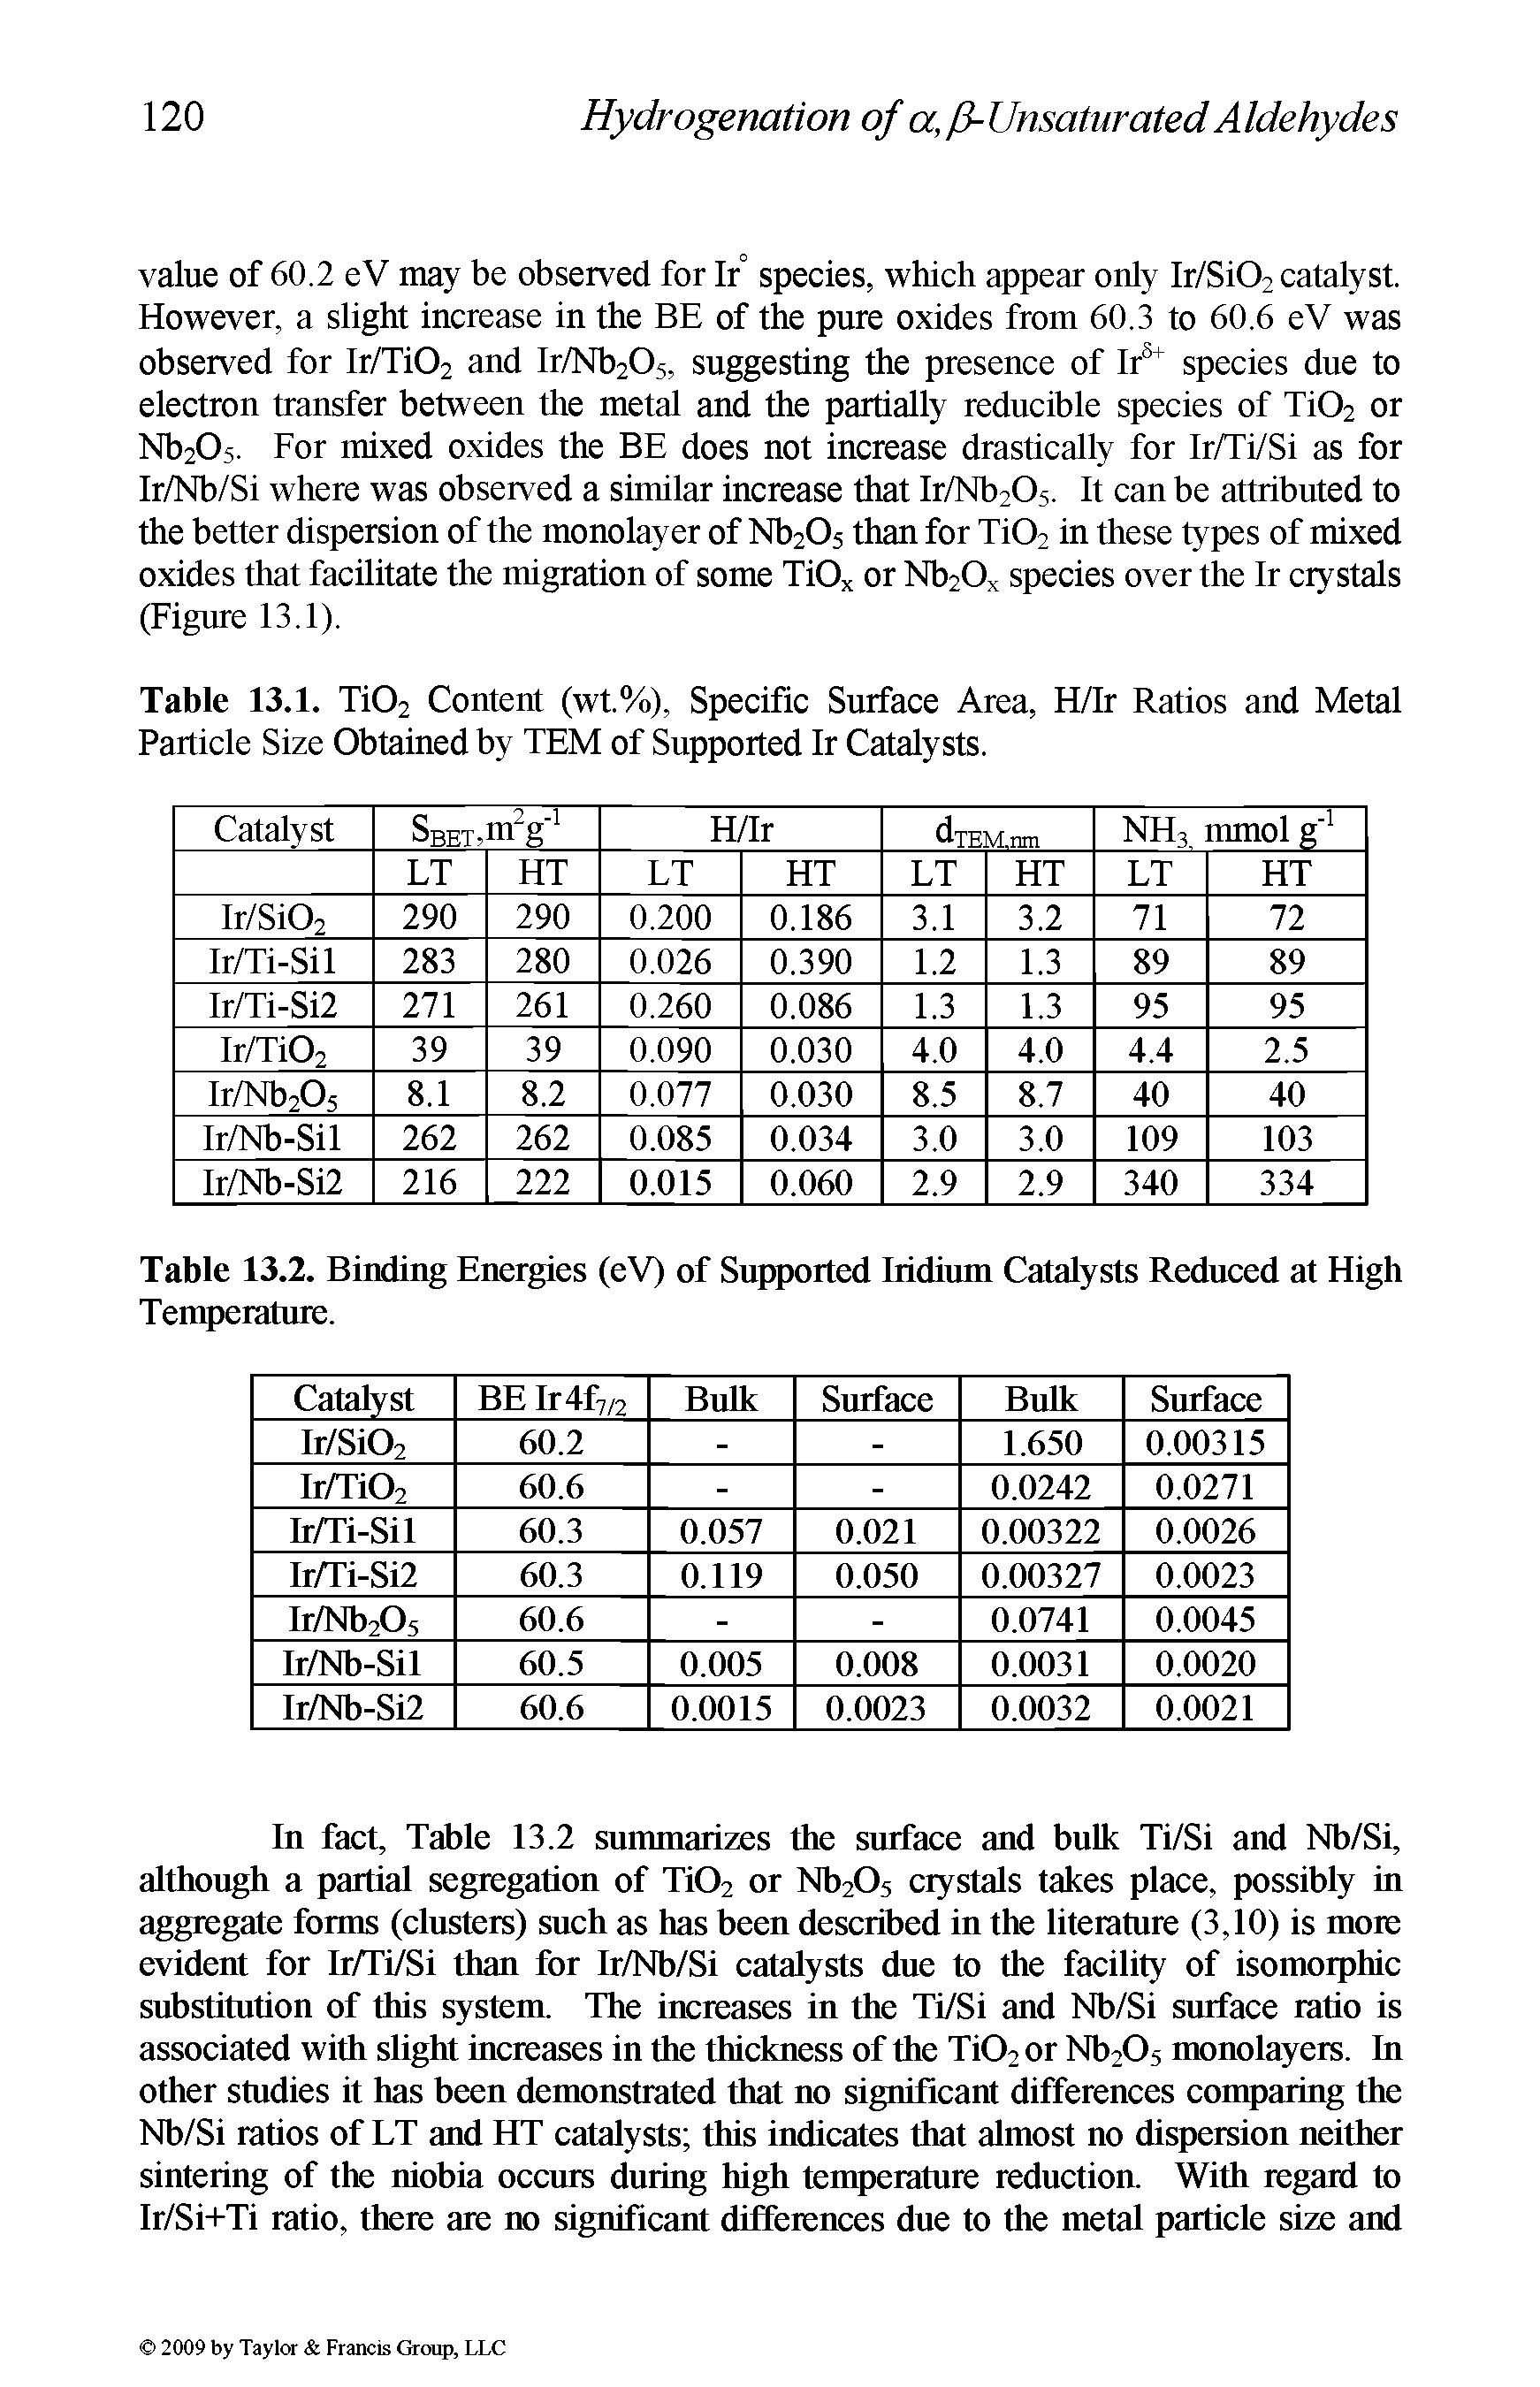 Table 13.1. Ti02 Content (wt.%), Specific Surface Area, H/Ir Ratios and Metal Particle Size Obtained by TEM of Supported Ir Catalysts.